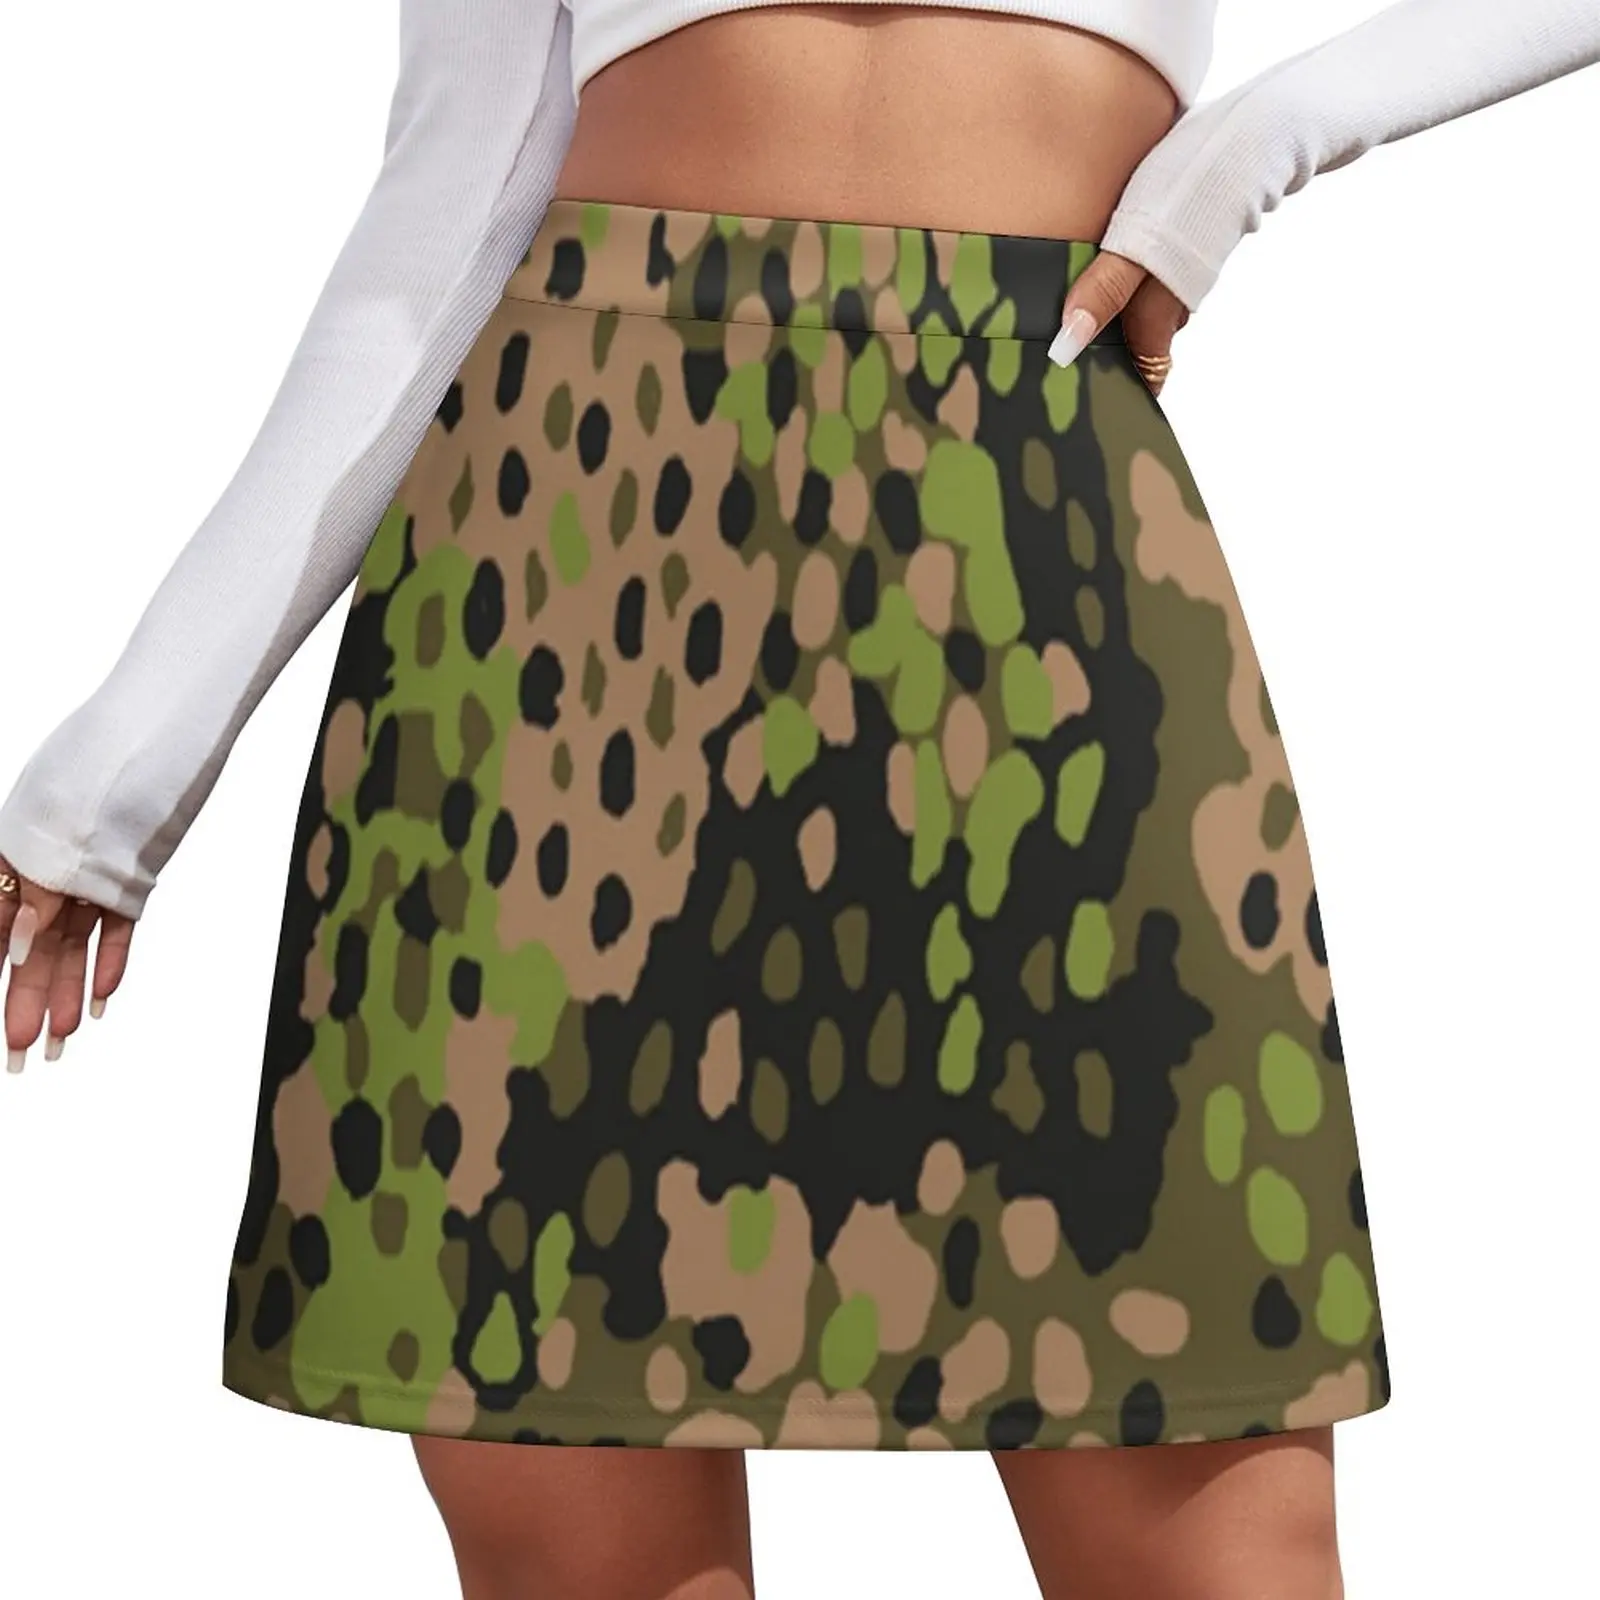 WW2 SS Erbsentarn camo Mini Skirt sexy short mini skirts new in dresses modest skirts for women summer clothes slit front pregnant maternity dresses for pregnancy pregnant clothes maxi gown women sexy photo shoot photography props clothing